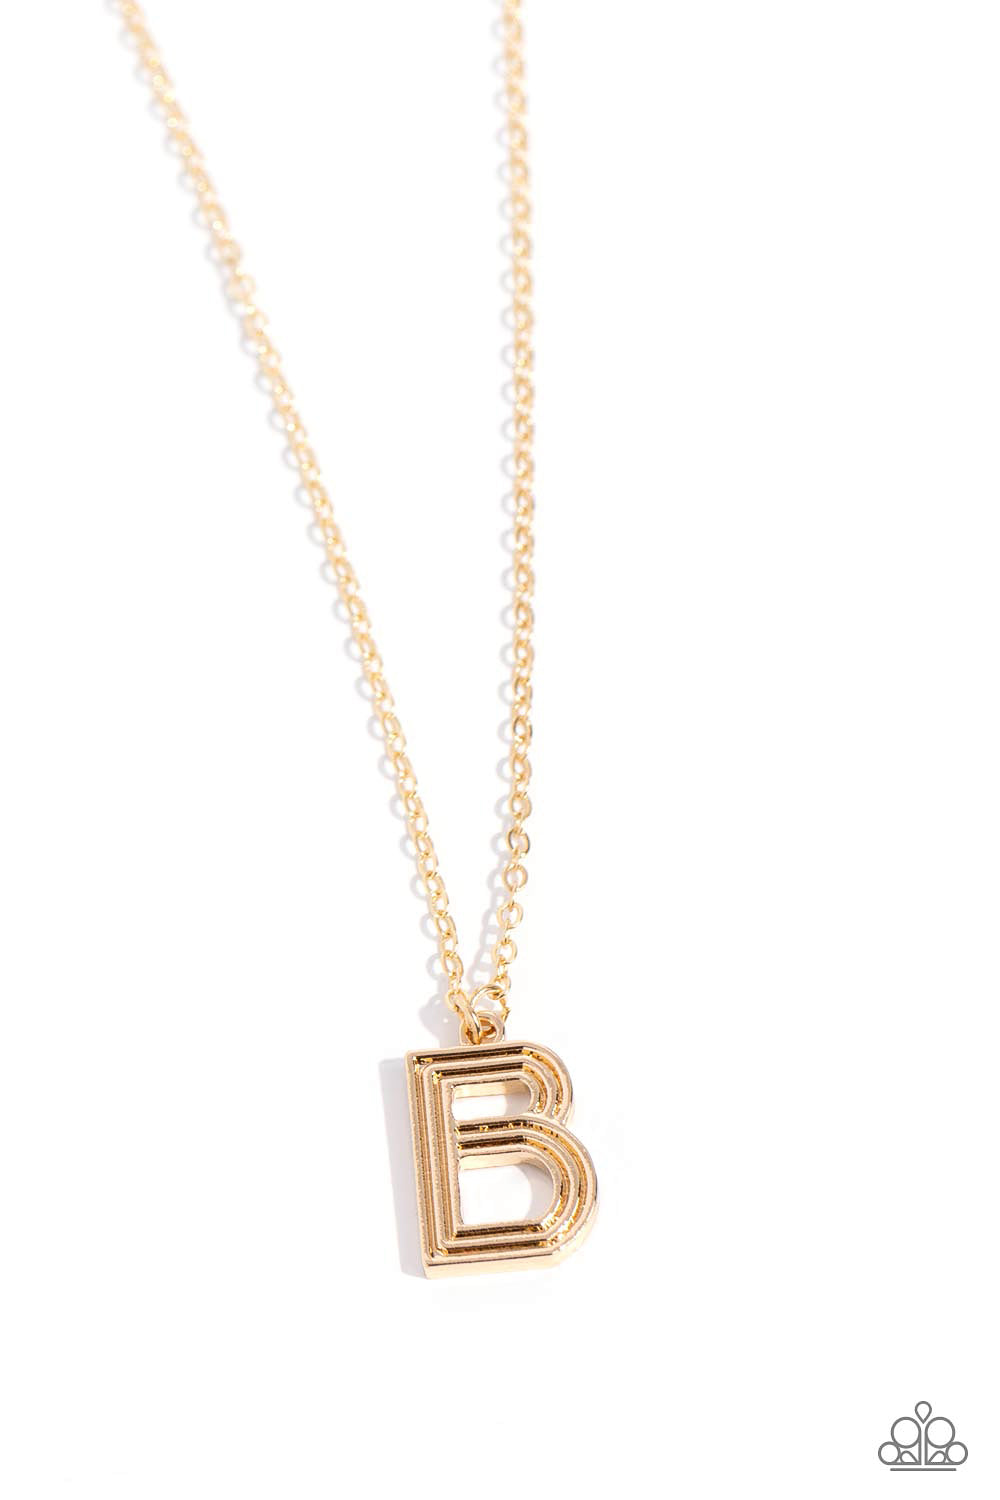 Leave Your Initials - Gold - B